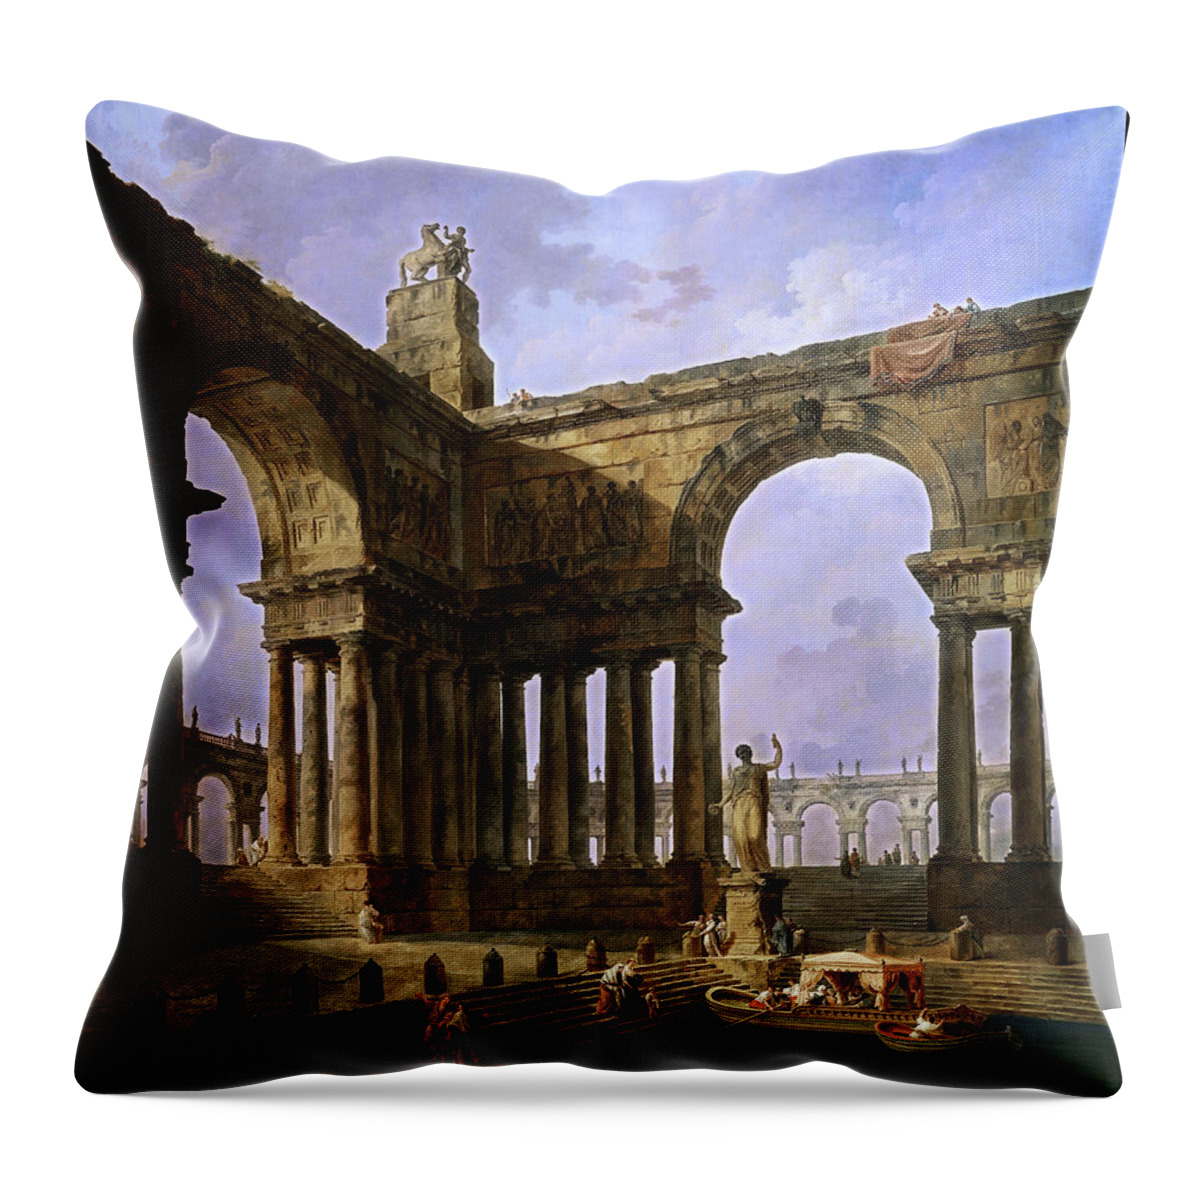 The Landing Place Throw Pillow featuring the painting The Landing Place by Hubert Robert by Rolando Burbon